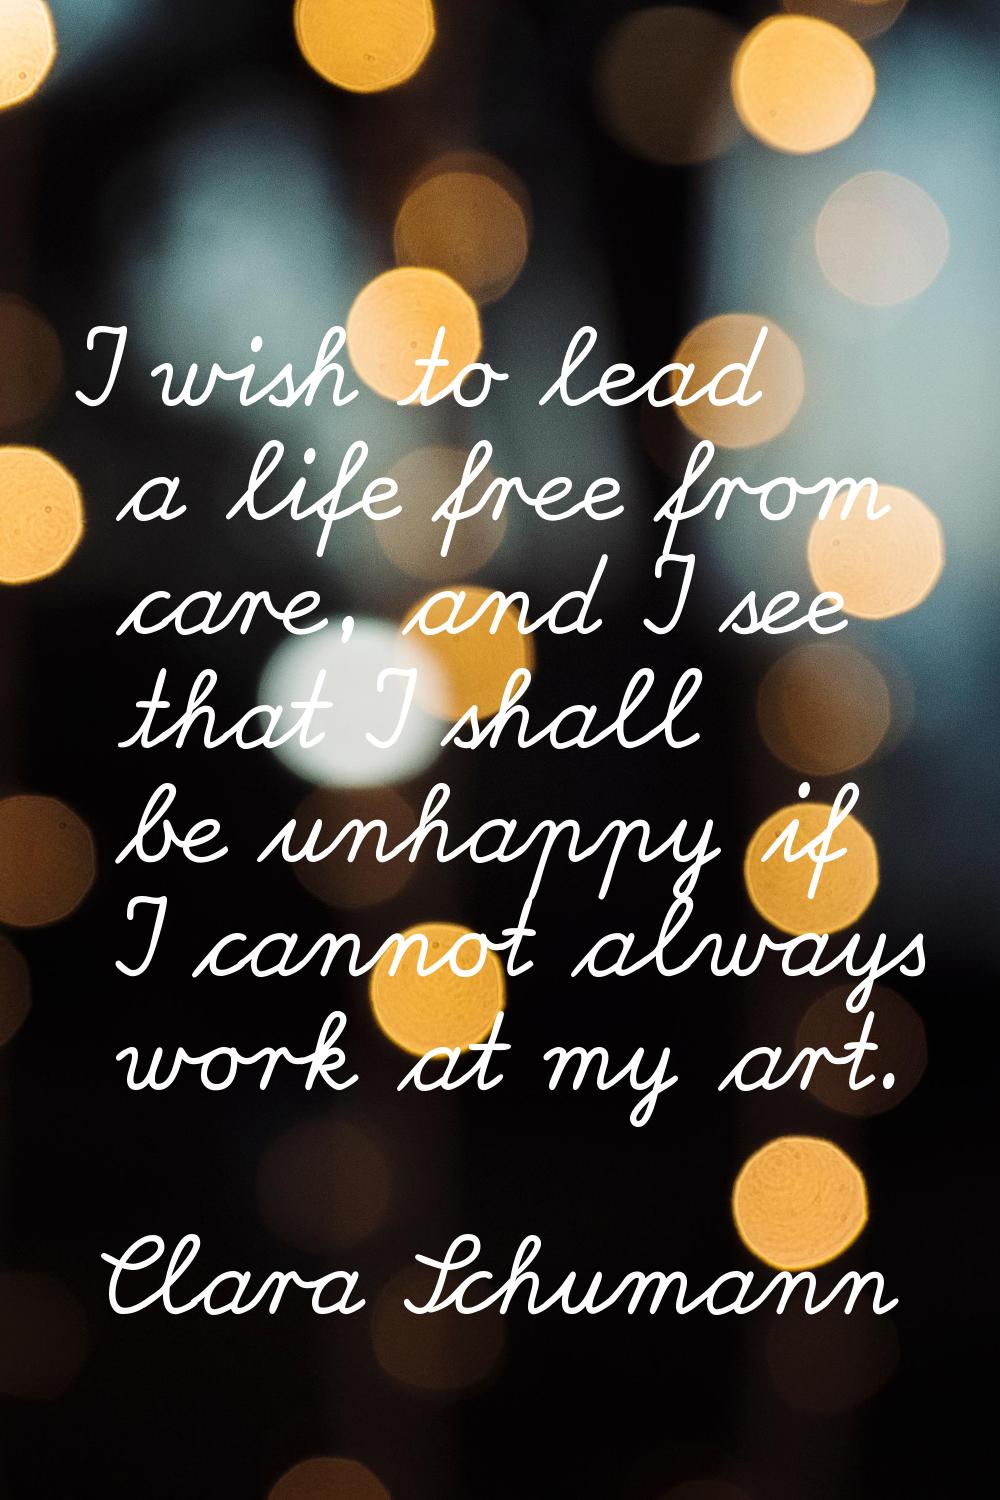 I wish to lead a life free from care, and I see that I shall be unhappy if I cannot always work at 